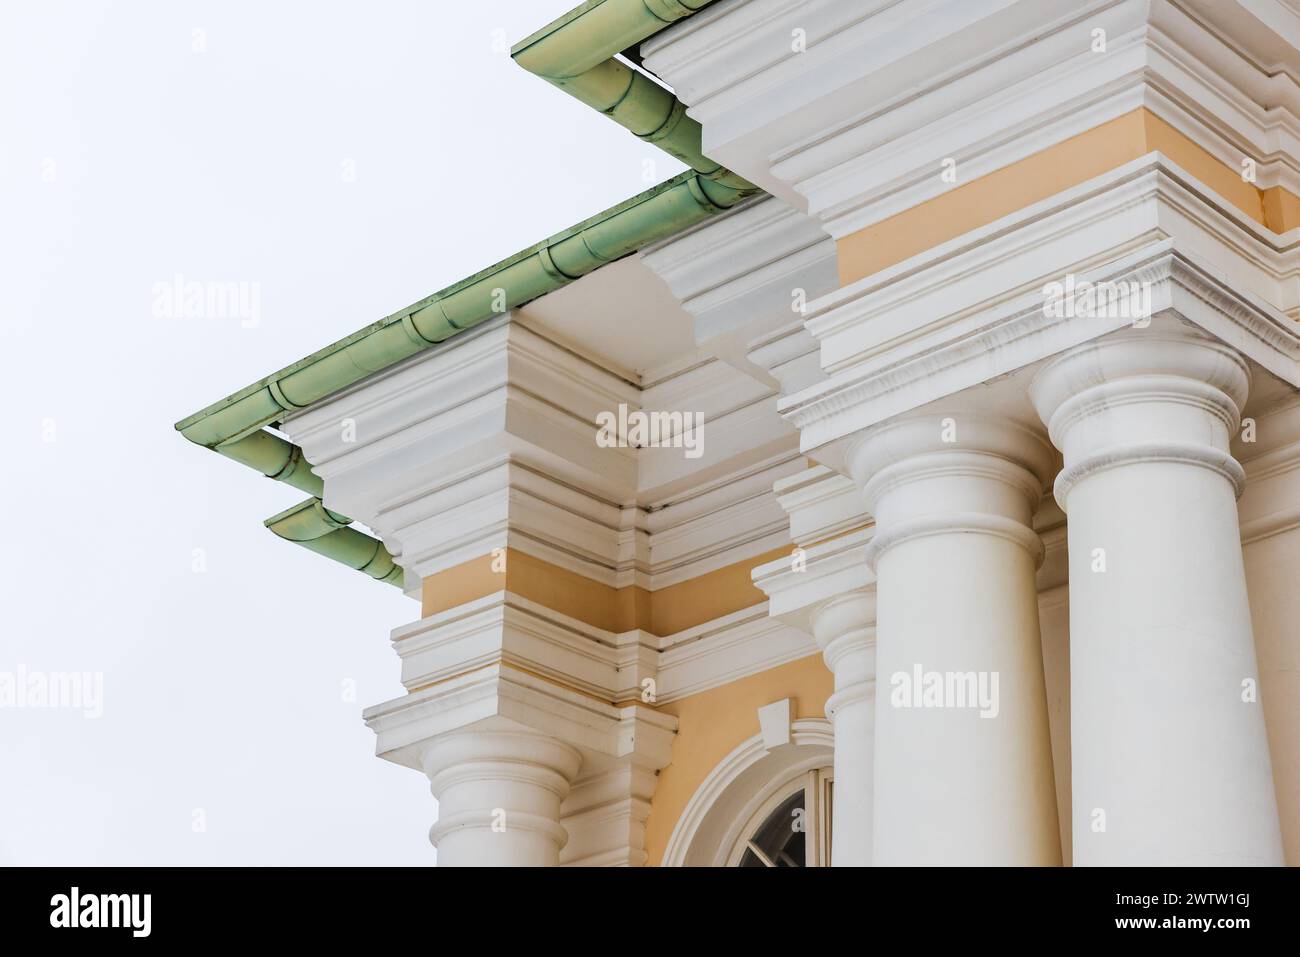 Classical portico with yellow and white details under green roof. Pillars and corners Stock Photo